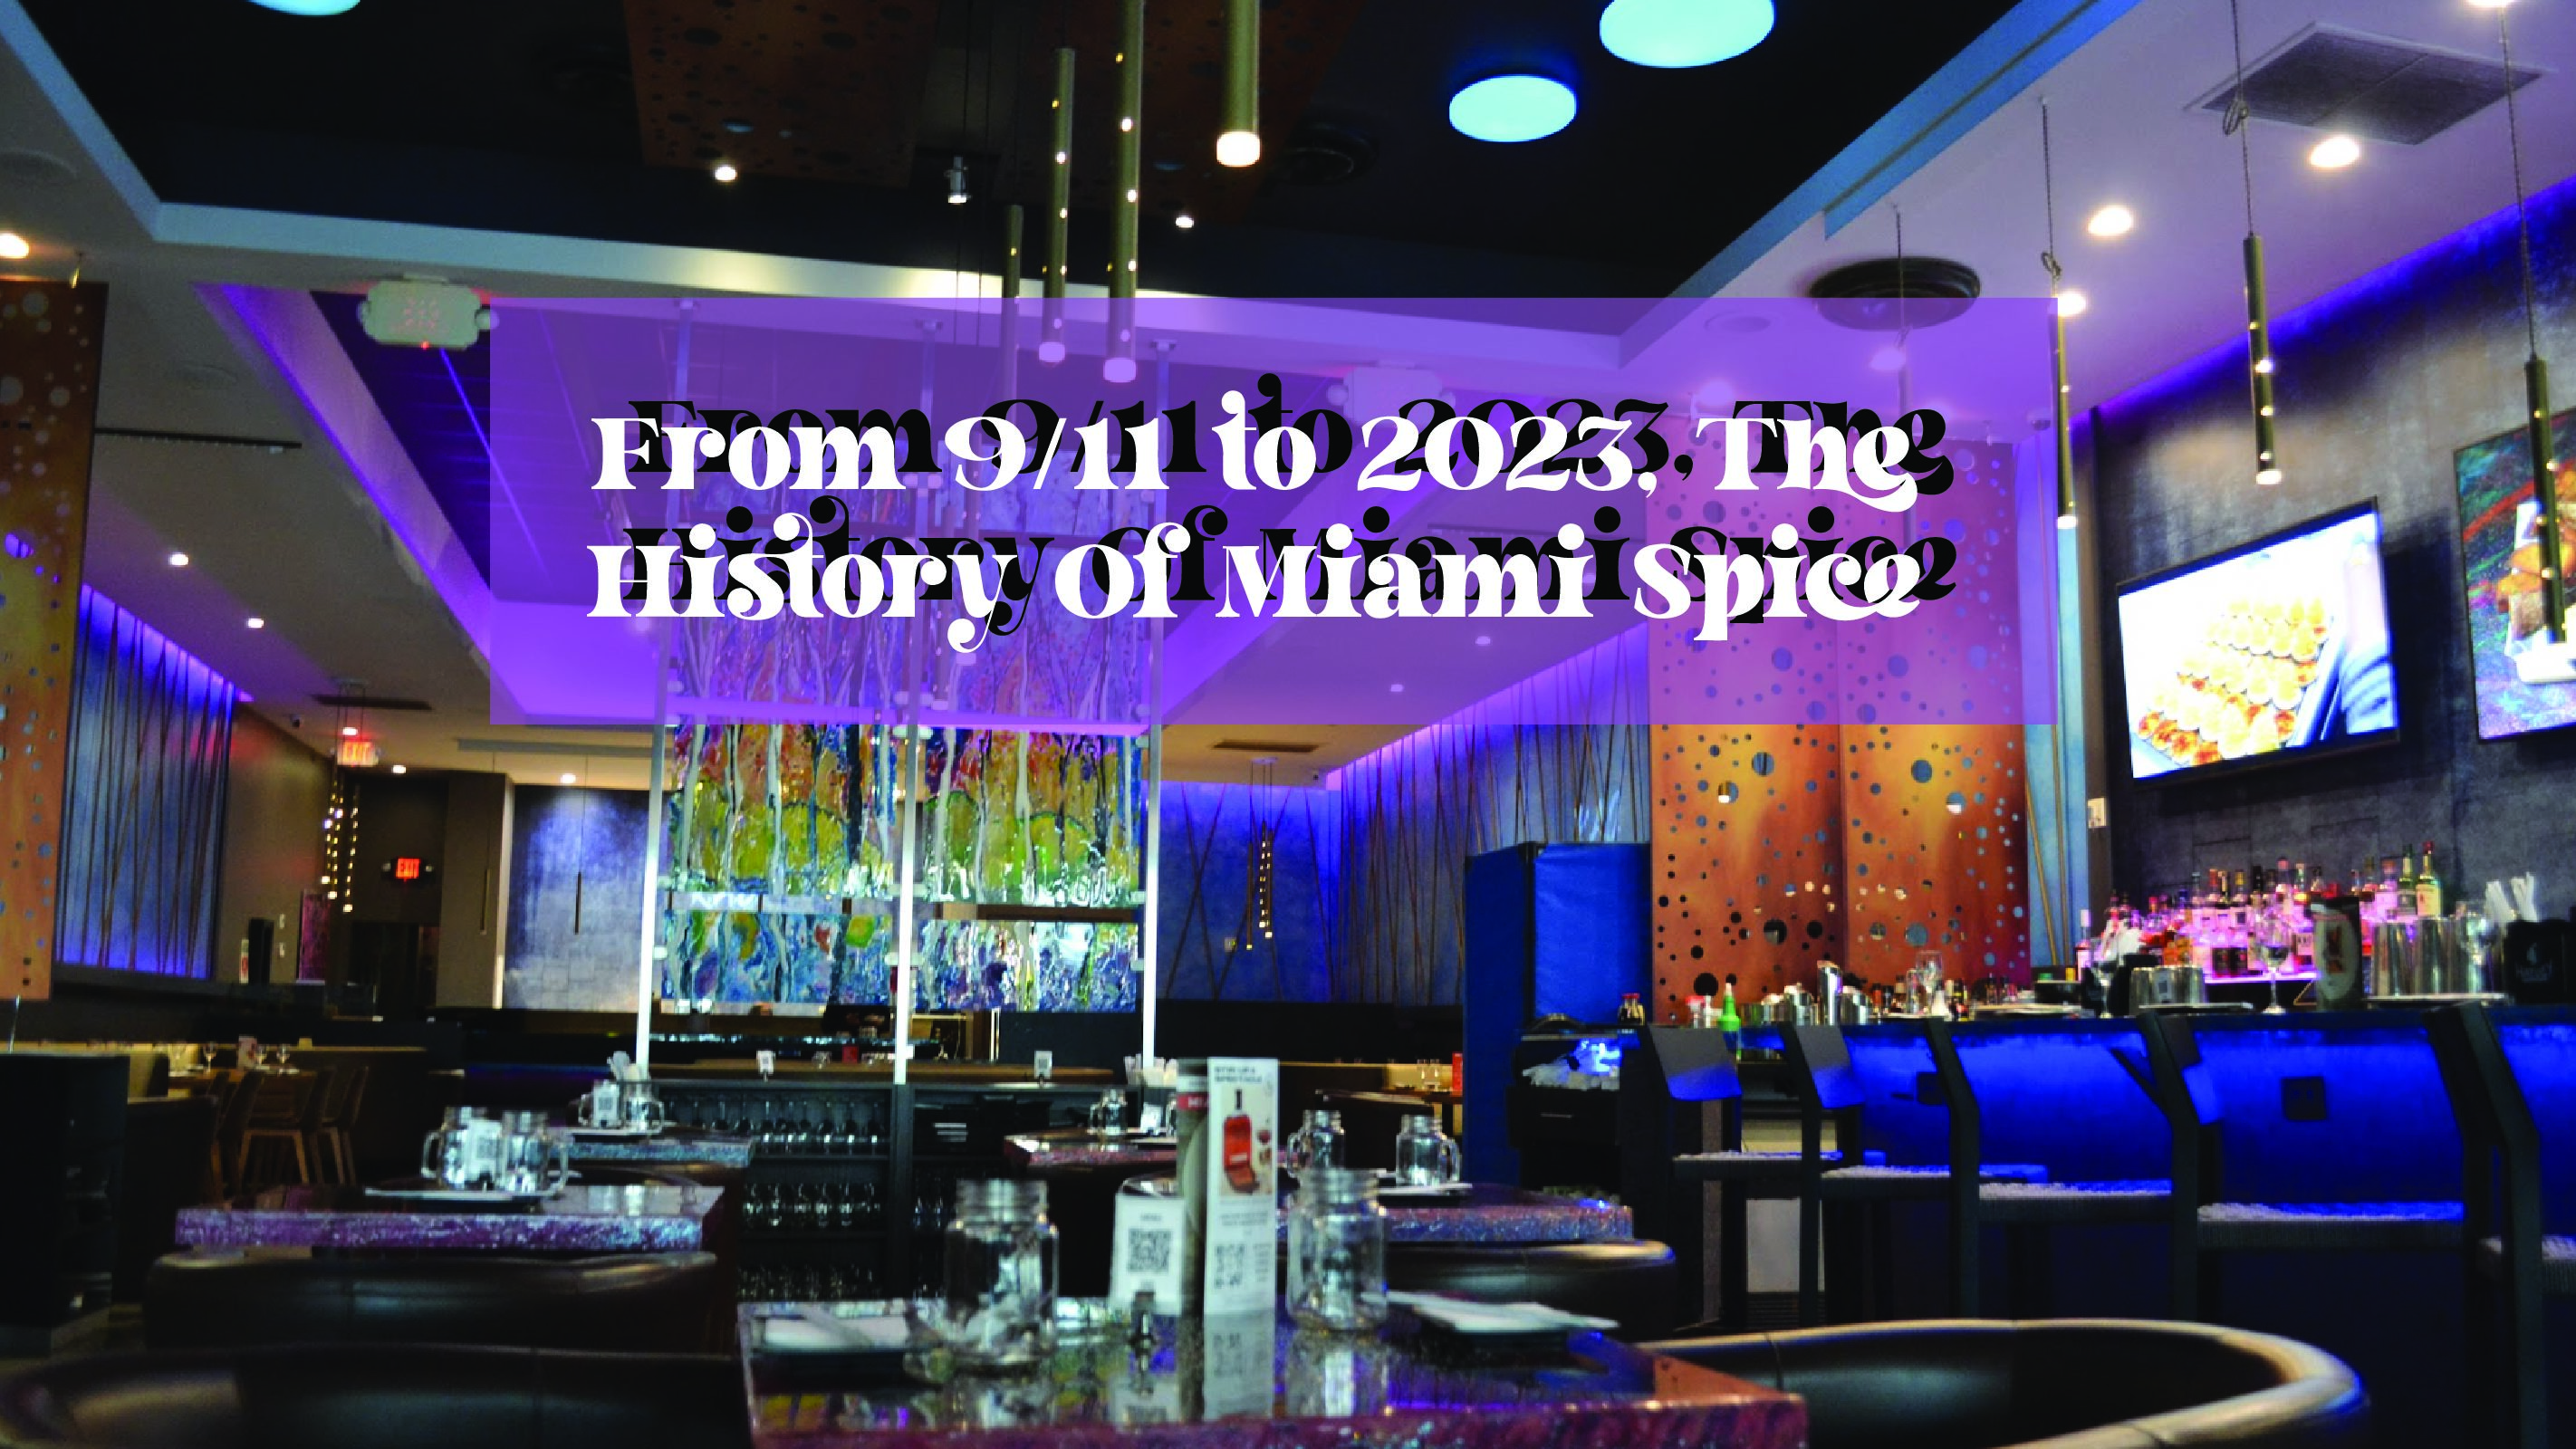 From 9/11 to 2023, The History Of Miami Spice